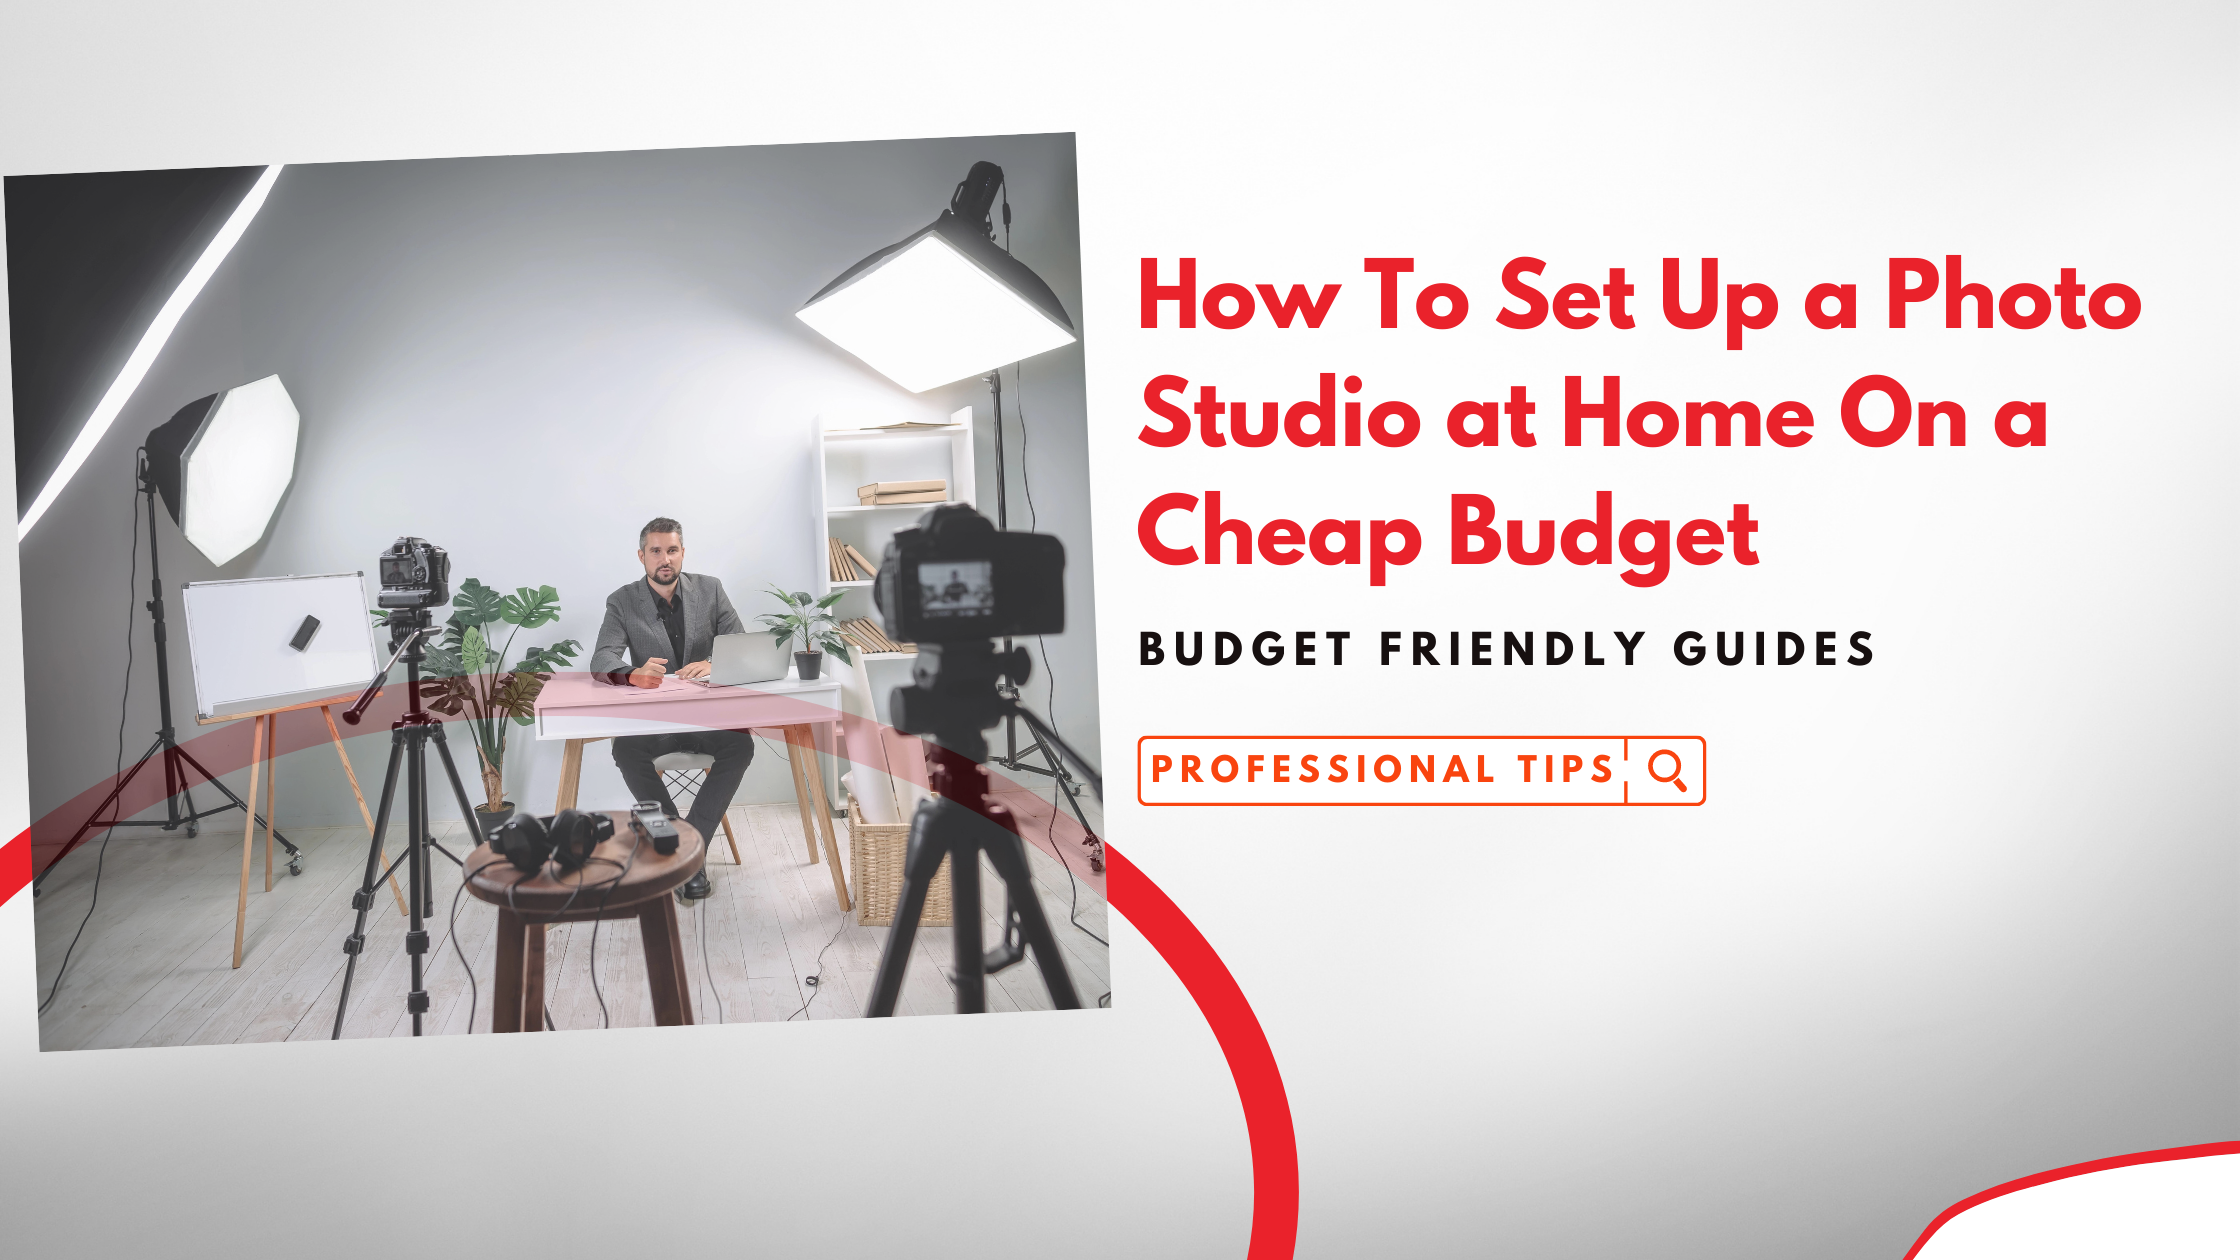 How To Set Up a Photo Studio at Home On a Cheap Budget by Following 6 Hacks